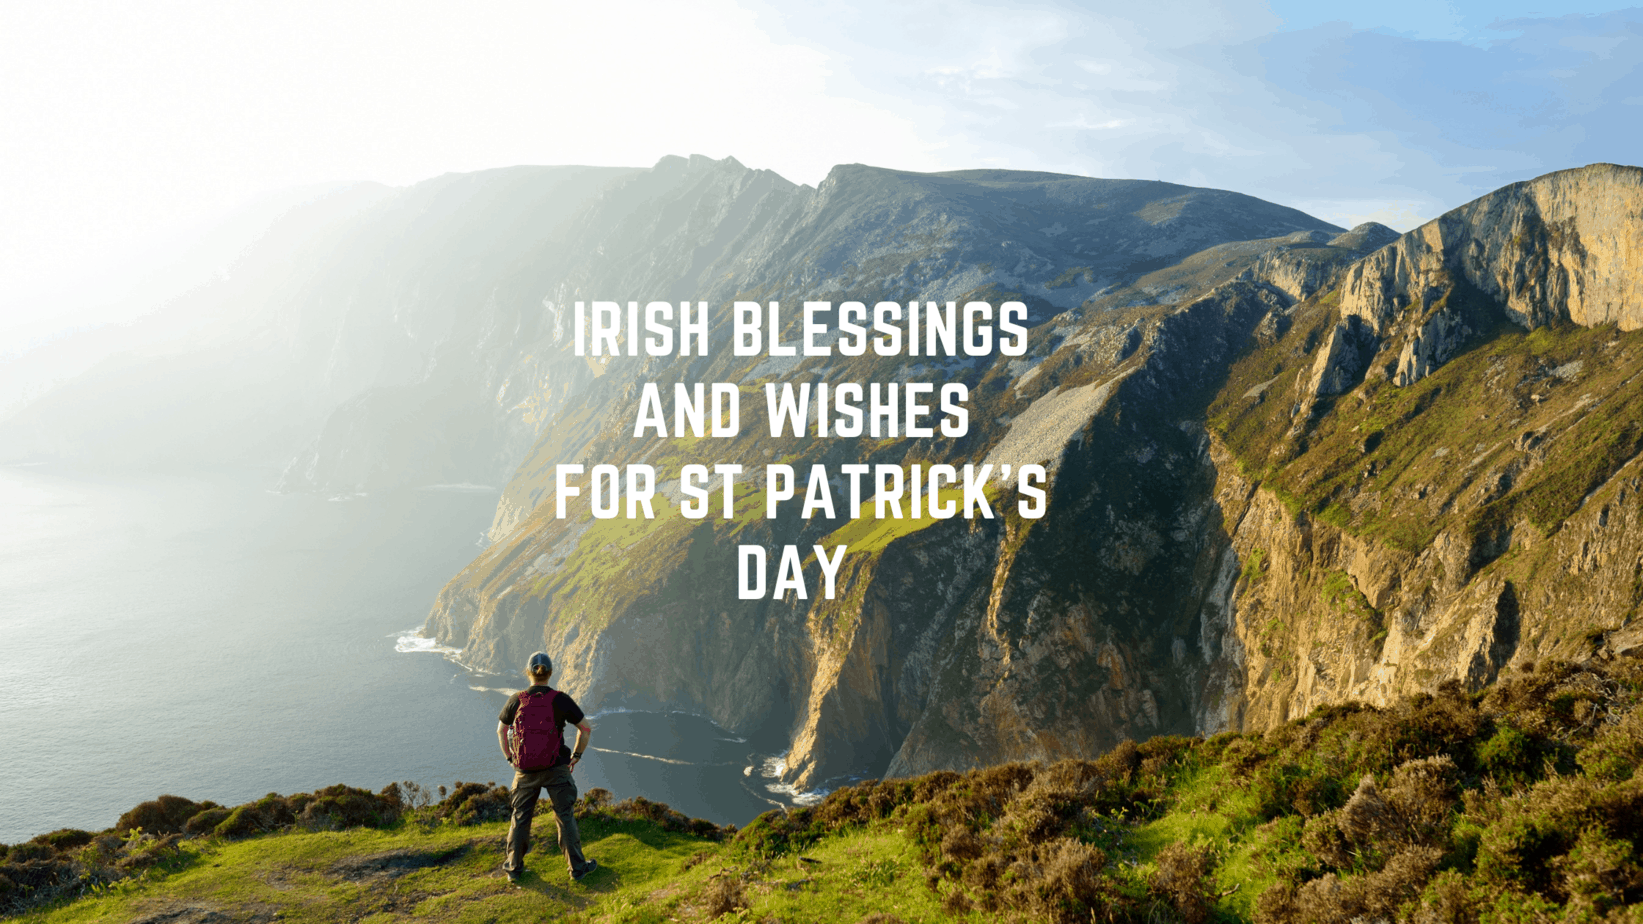 Top 10 Irish Blessings And Wishes For St Patrick's Day 2021